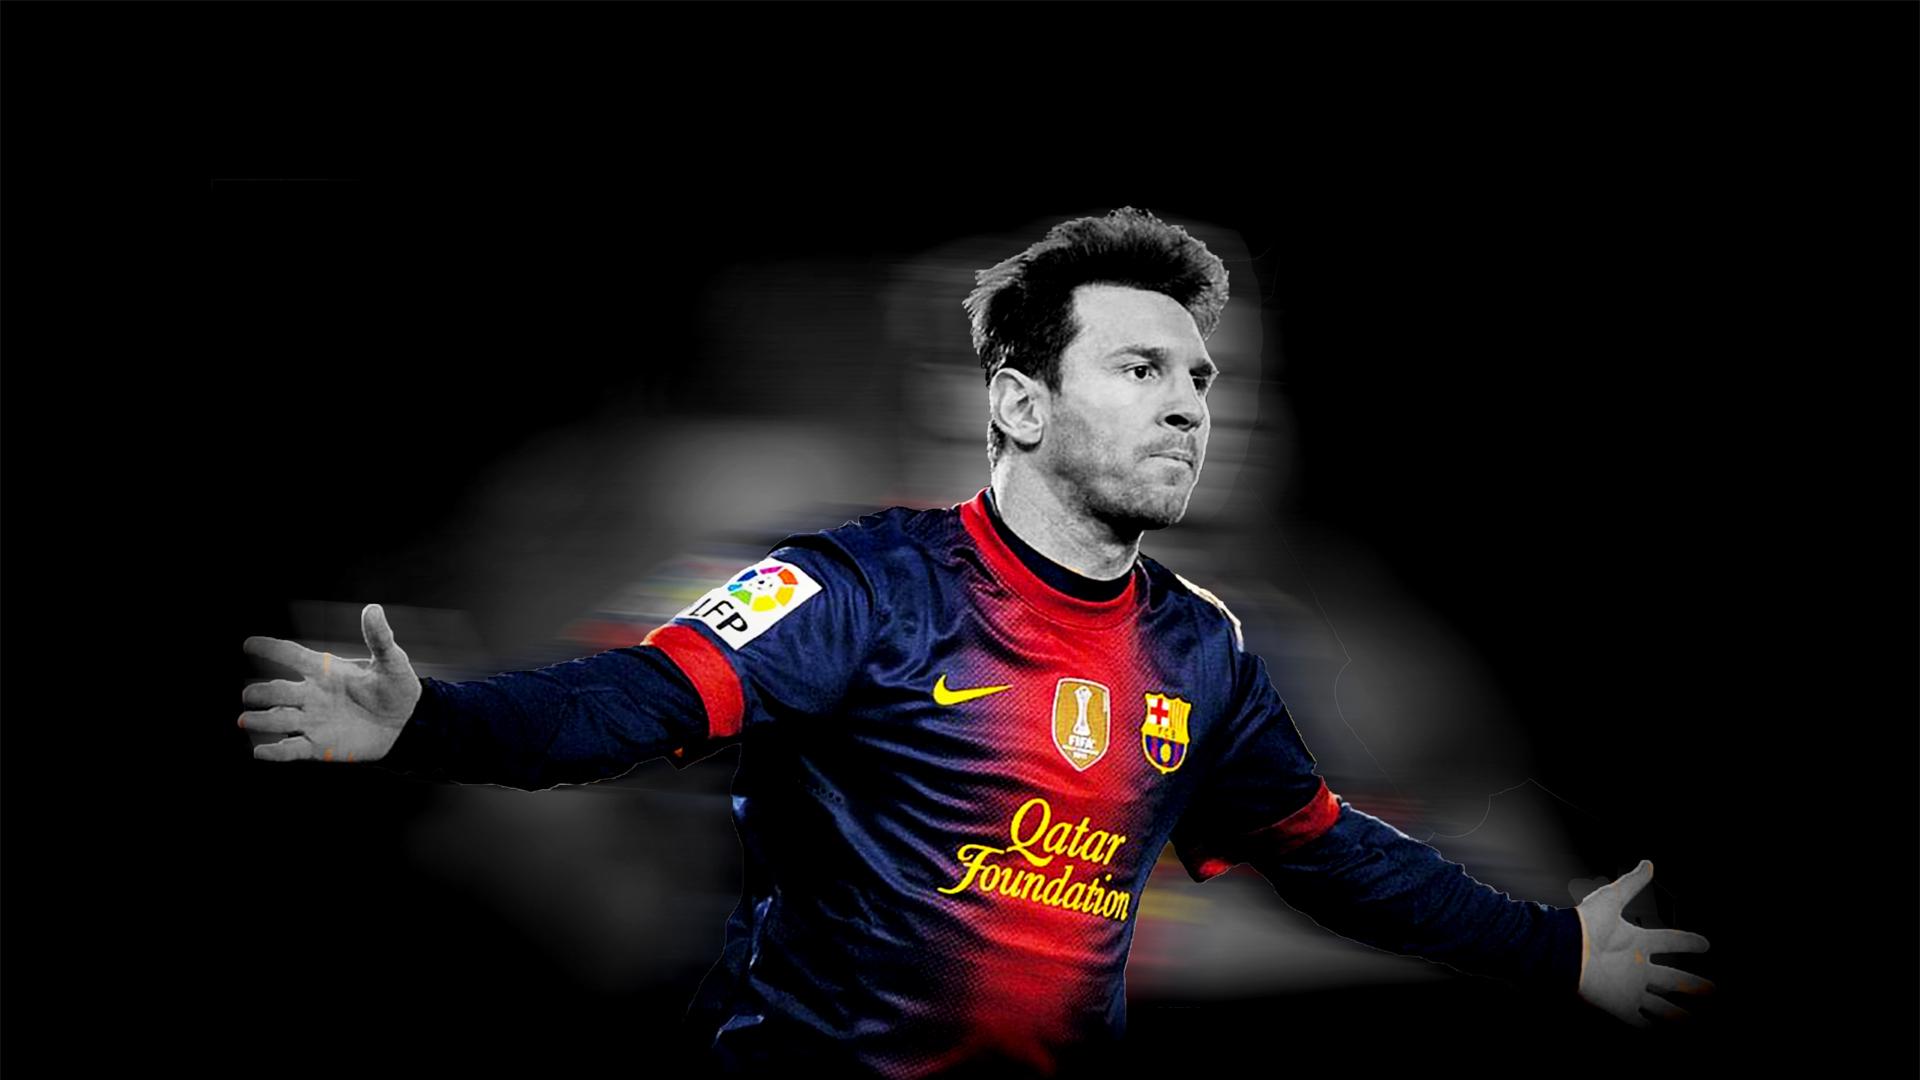 Lionel Messi Wallpaper Download High Quality HD Image Of Messi